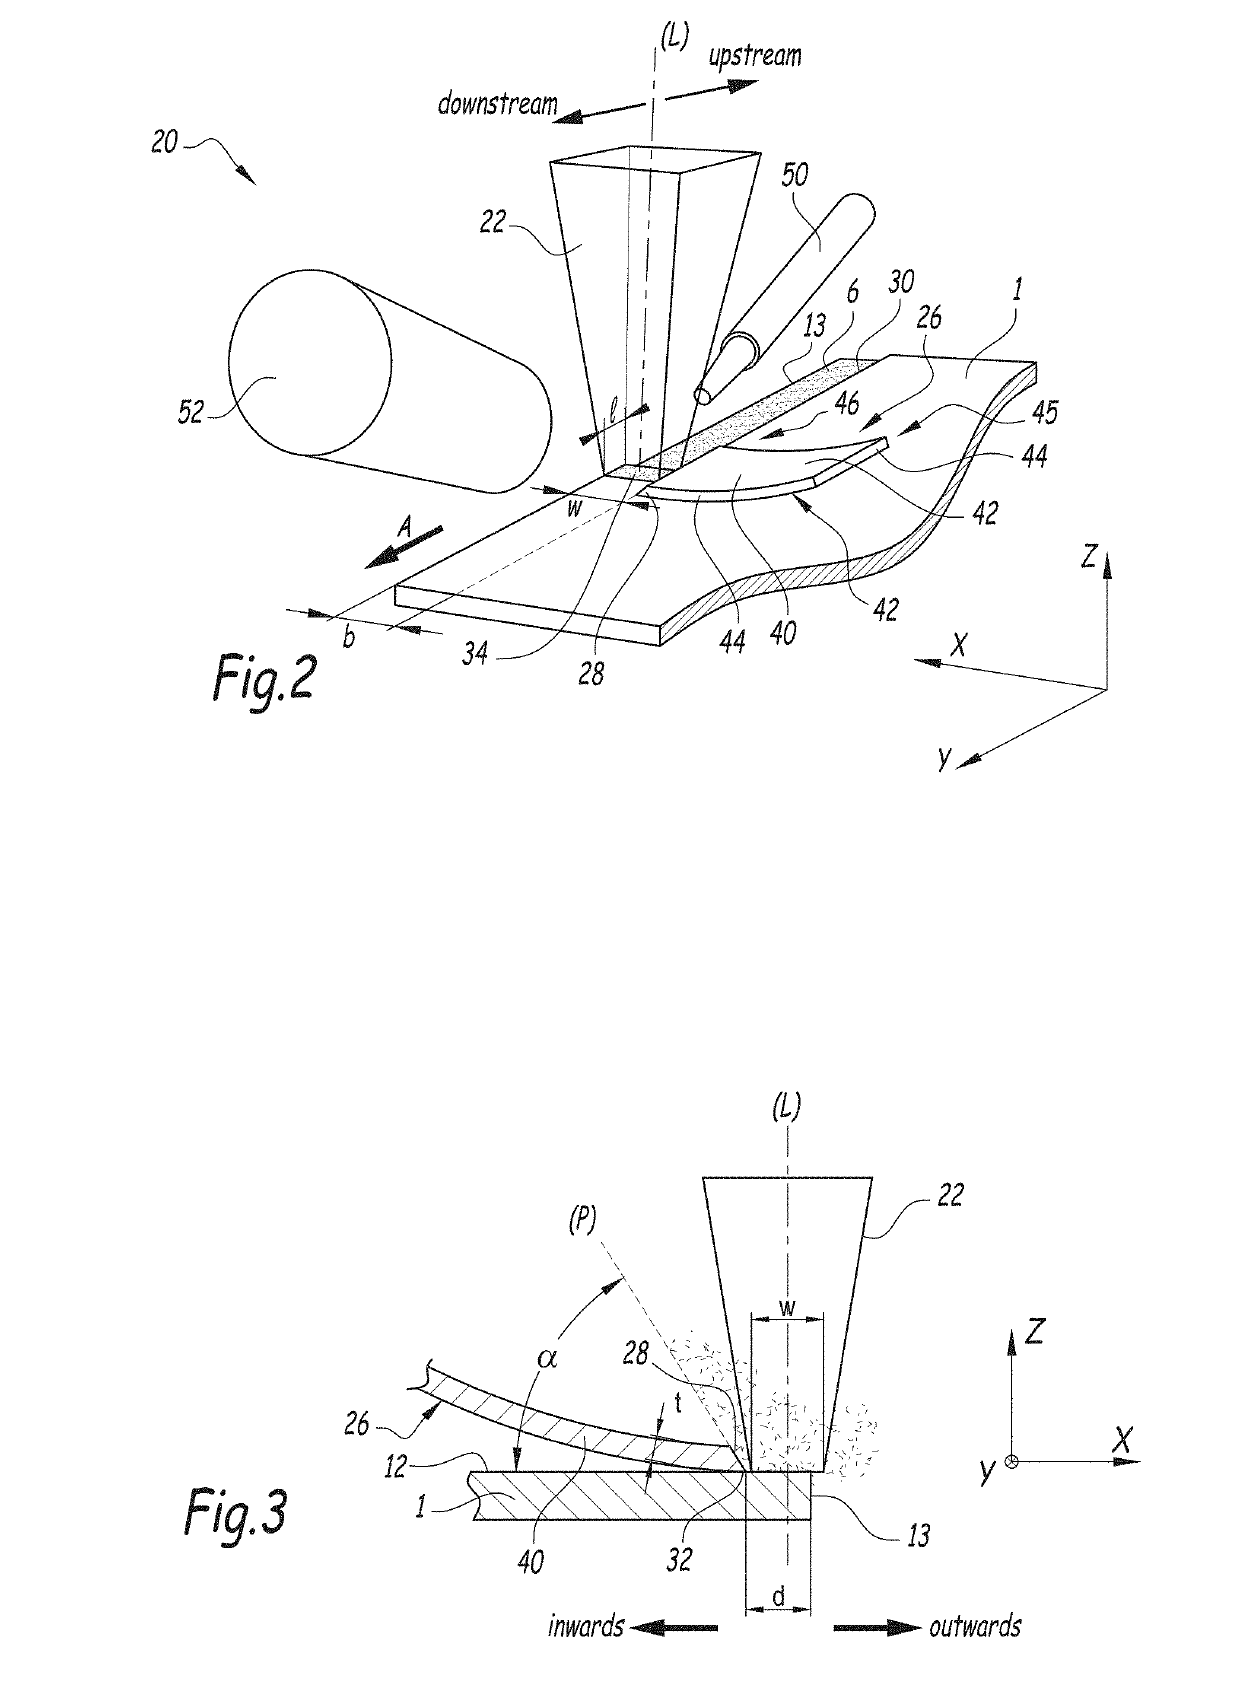 Method for Preparing a Precoated Sheet and Associated Installation